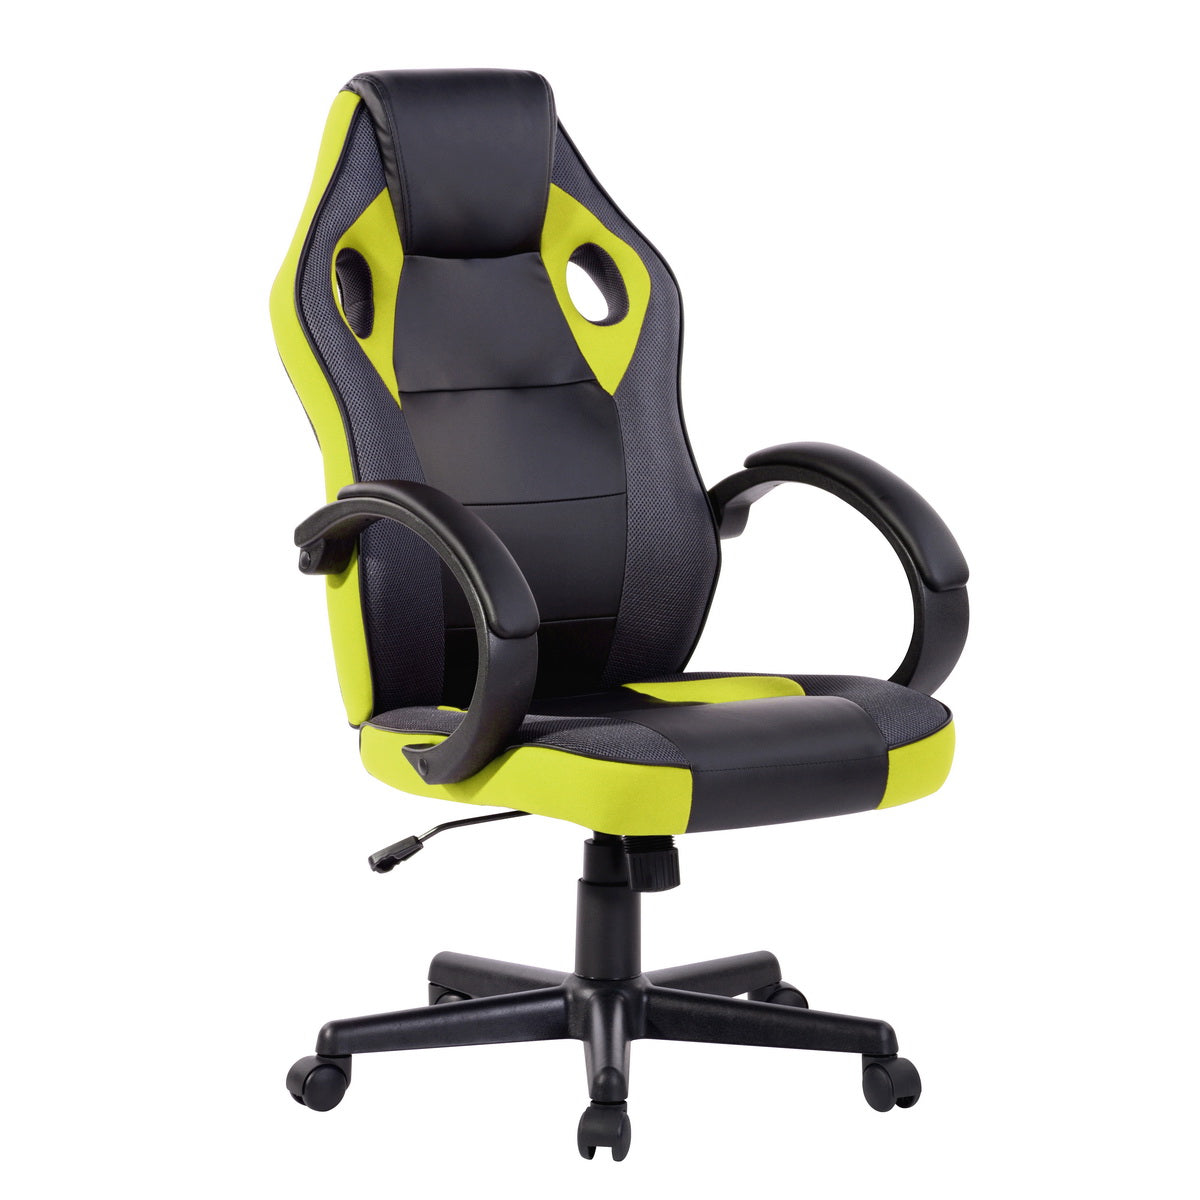 Tunney Game Chair